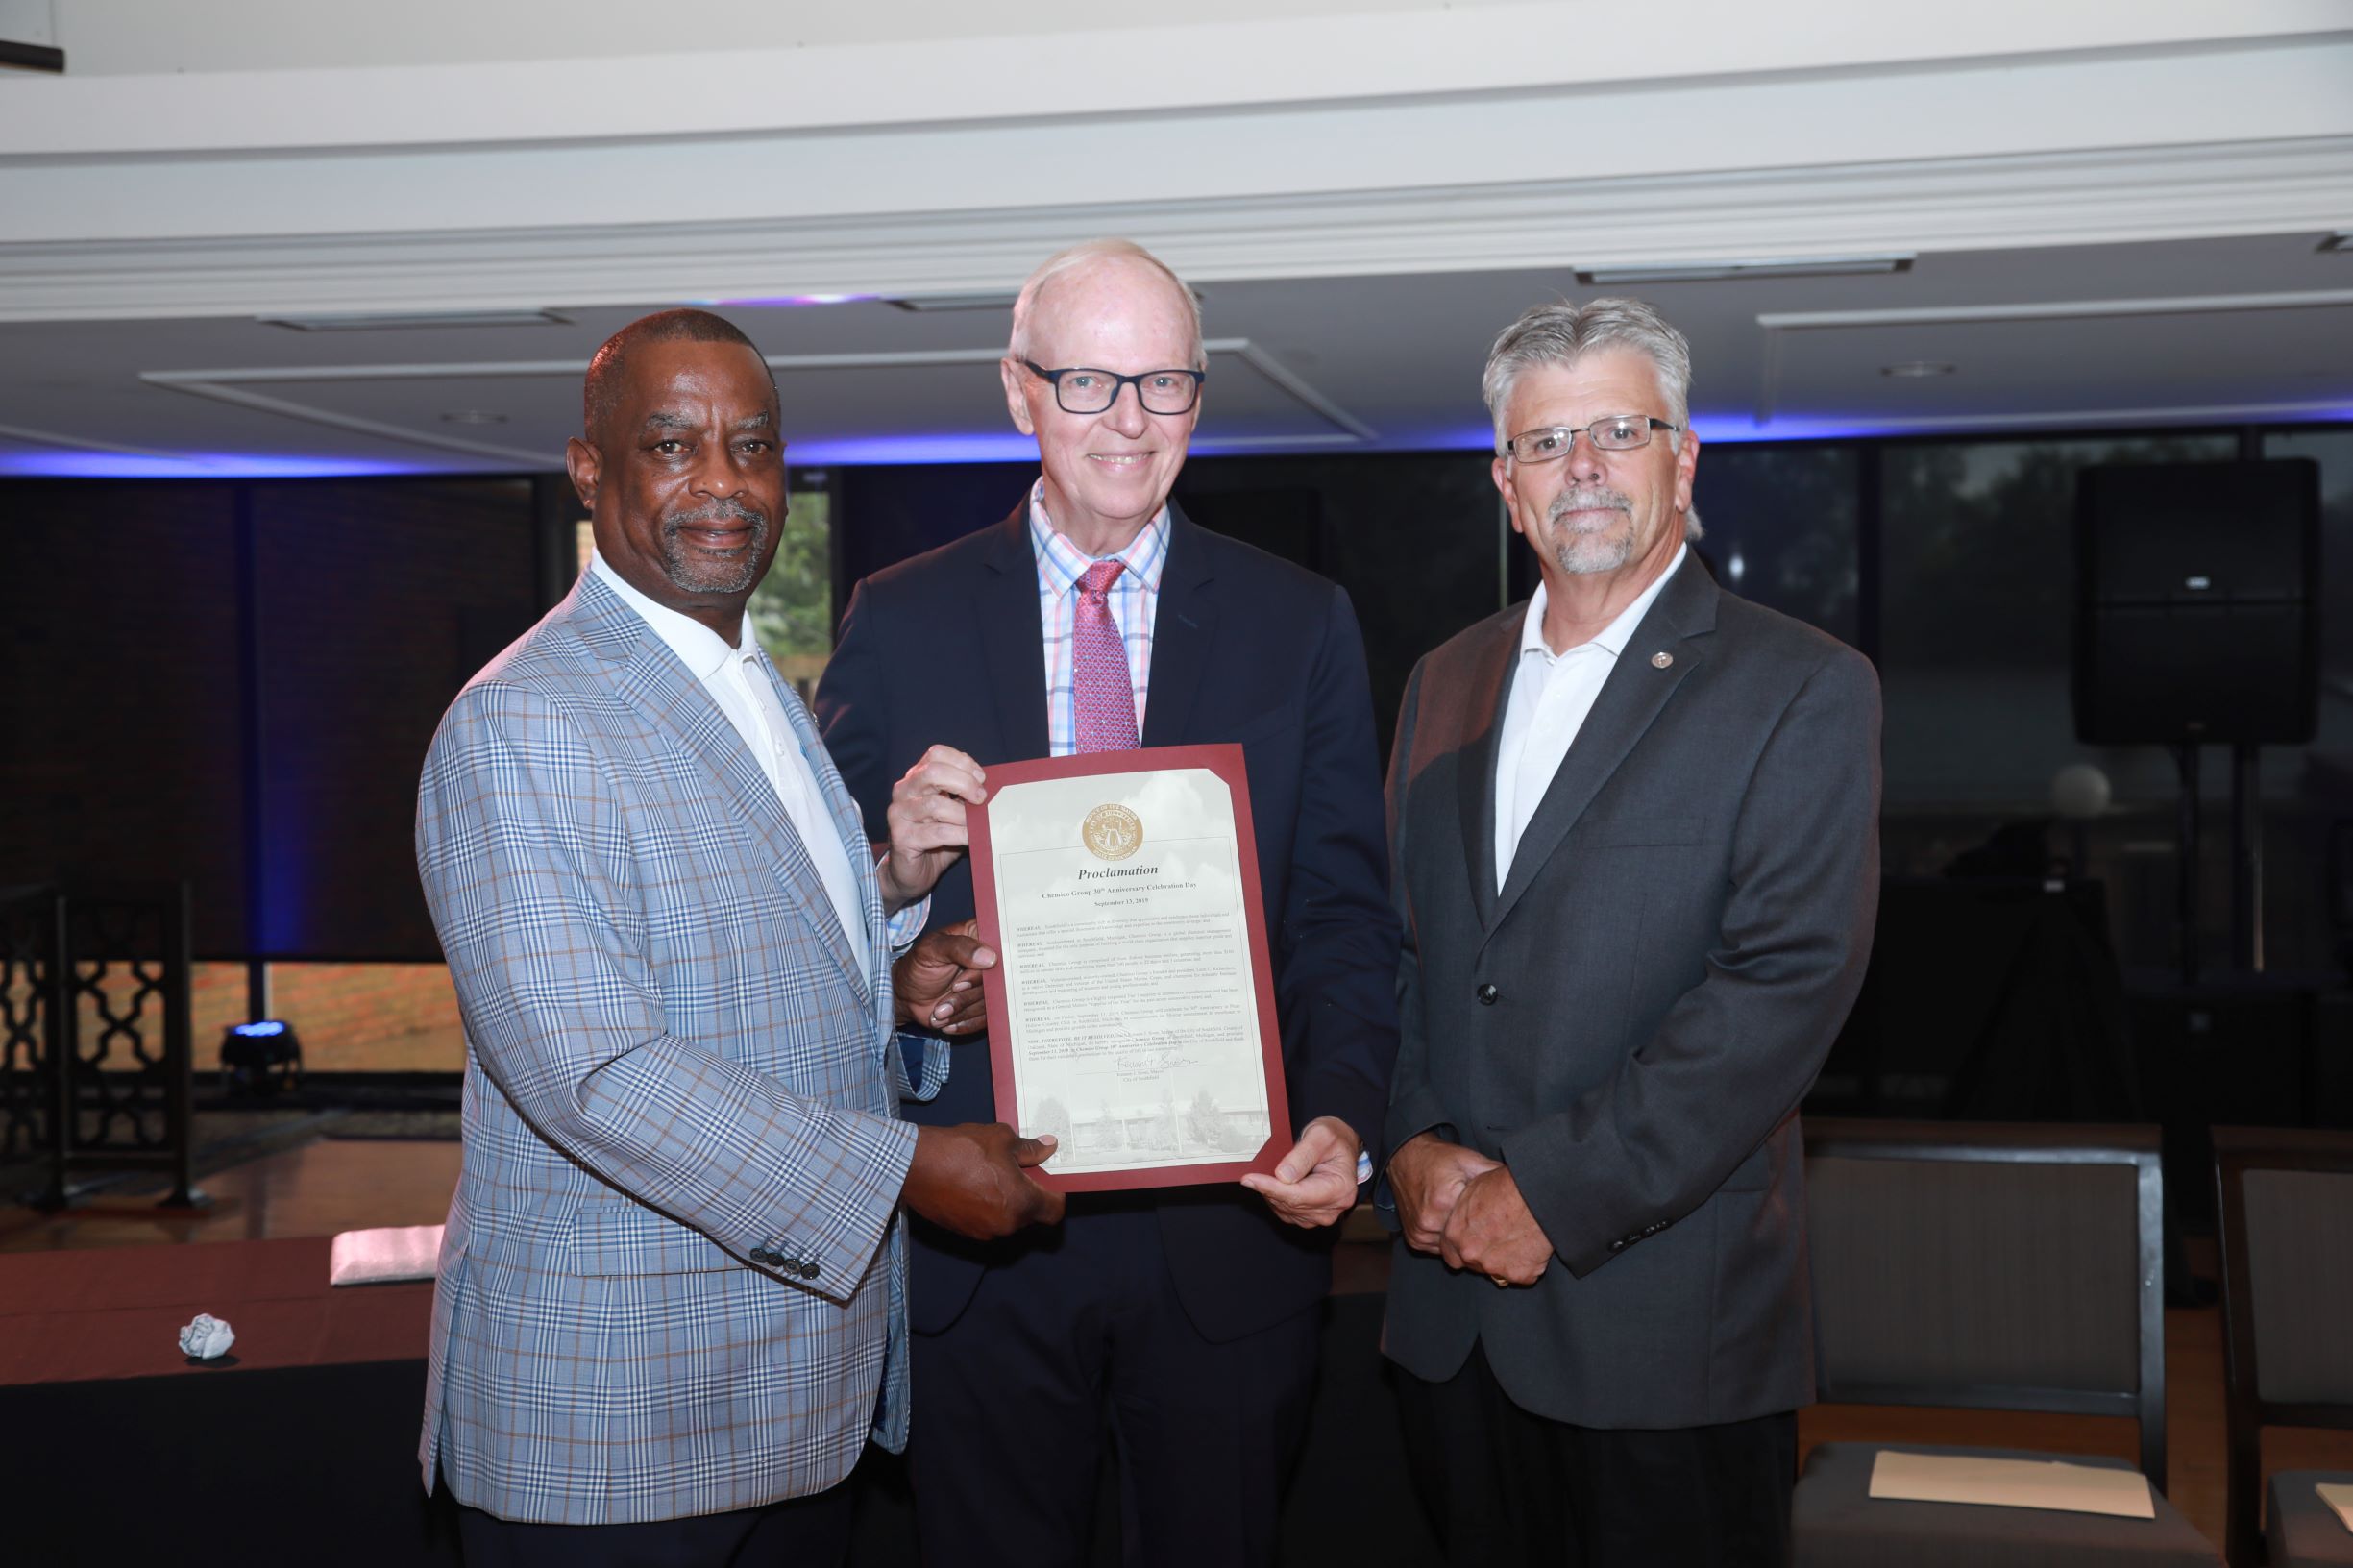 From left: Chemico Group President and CEO Leon C. Richardson, Southfield Mayor Ken Siver and Chemico Co-Founder Paul Sinko